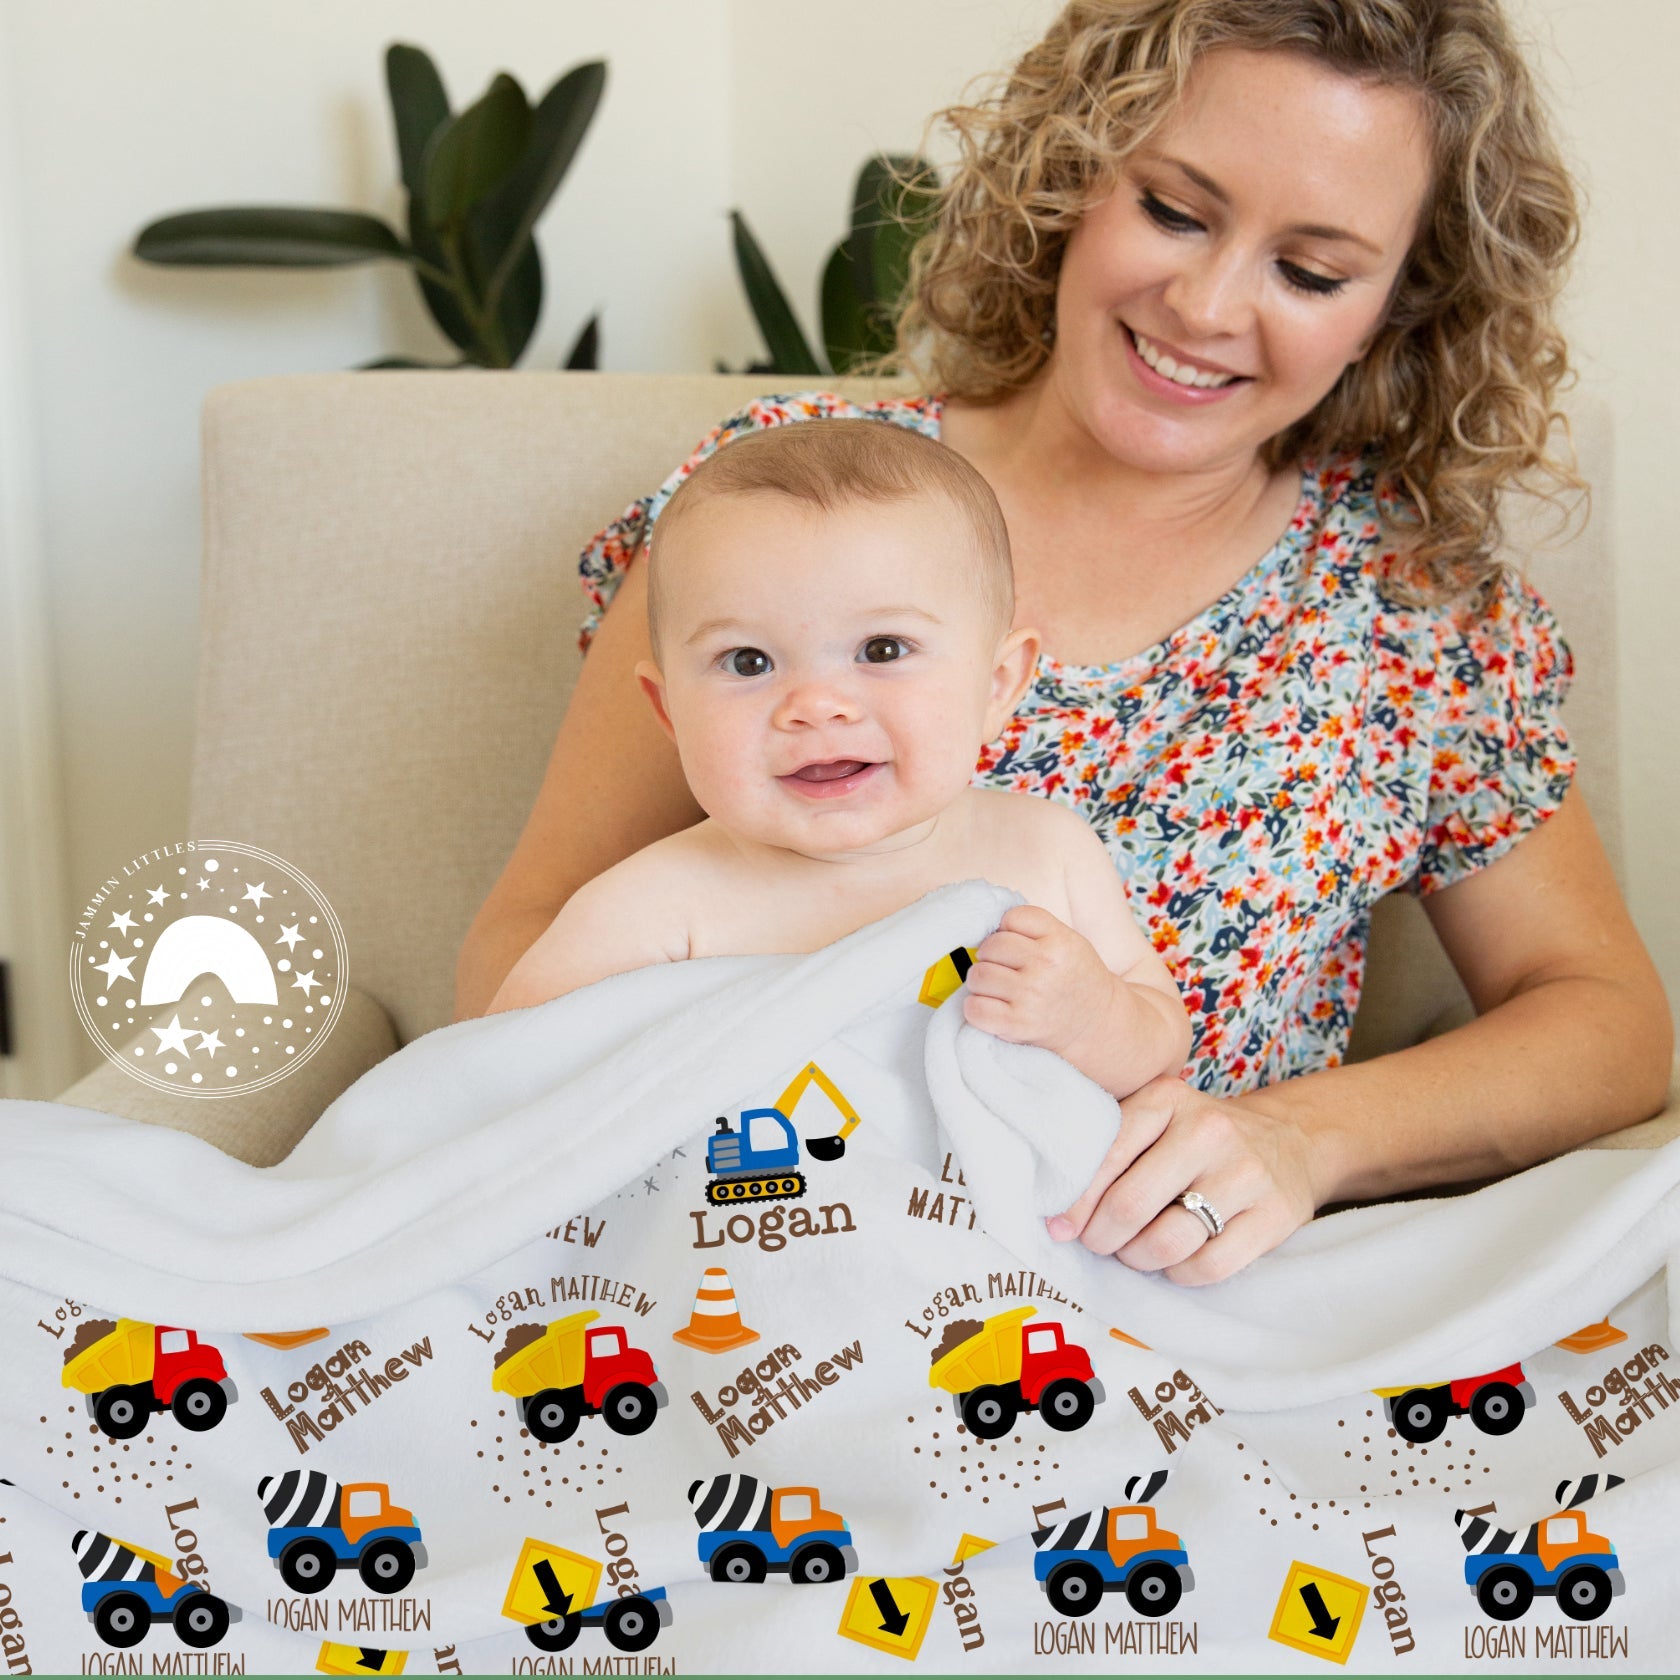 Construction Vehicle Baby Blanket - Personalized Baby Name blanket - Jammin Threads